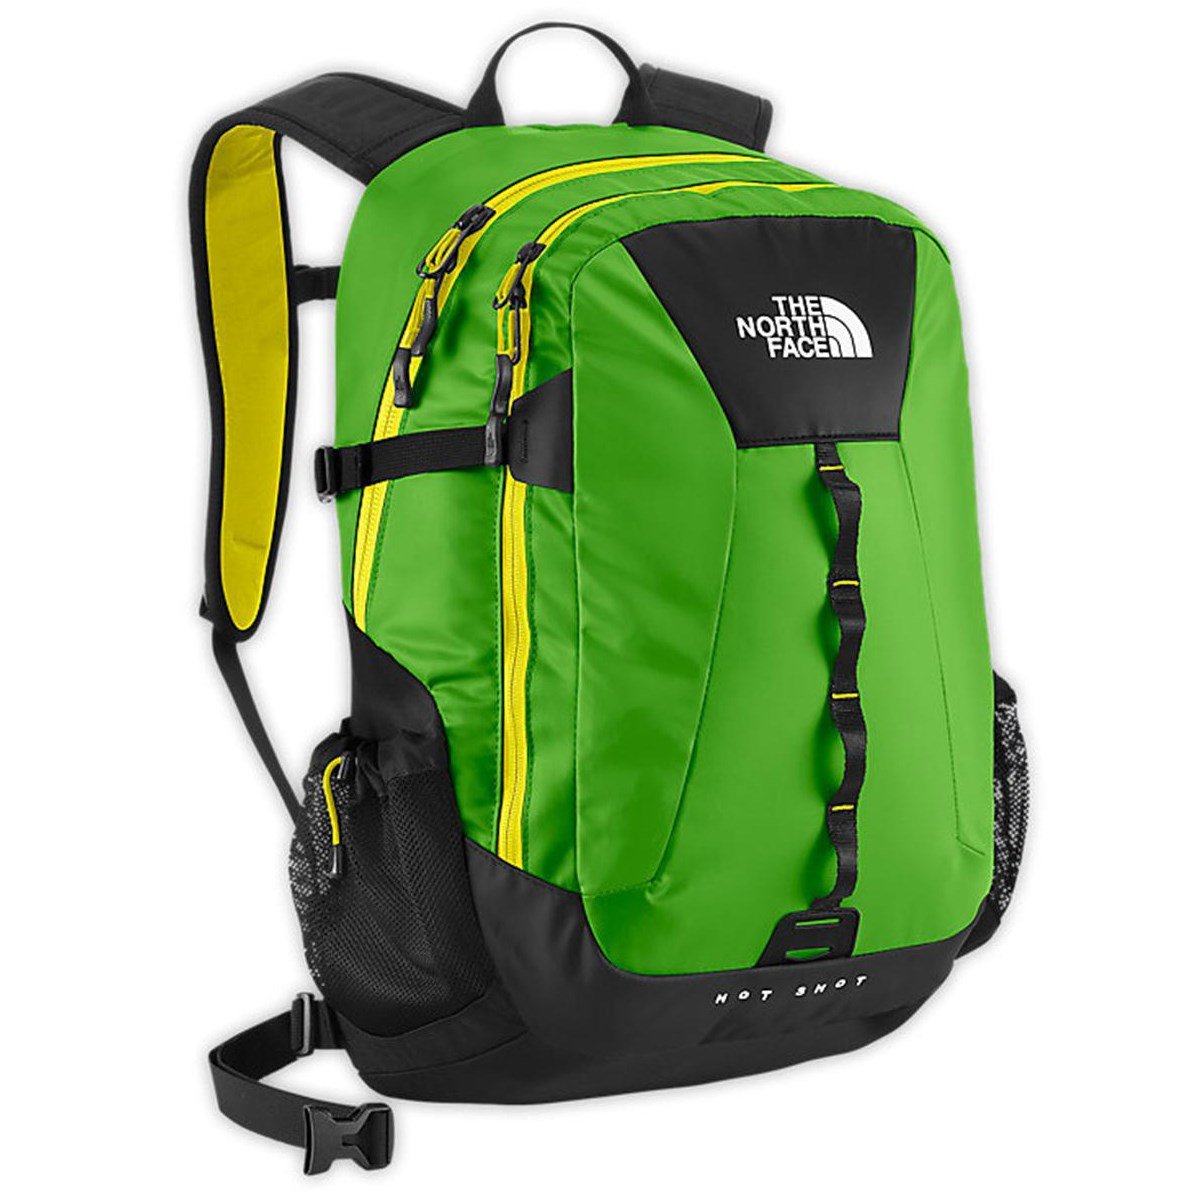 North Face Hot Shot Backpack Dimensions Patmo Technologies Limited